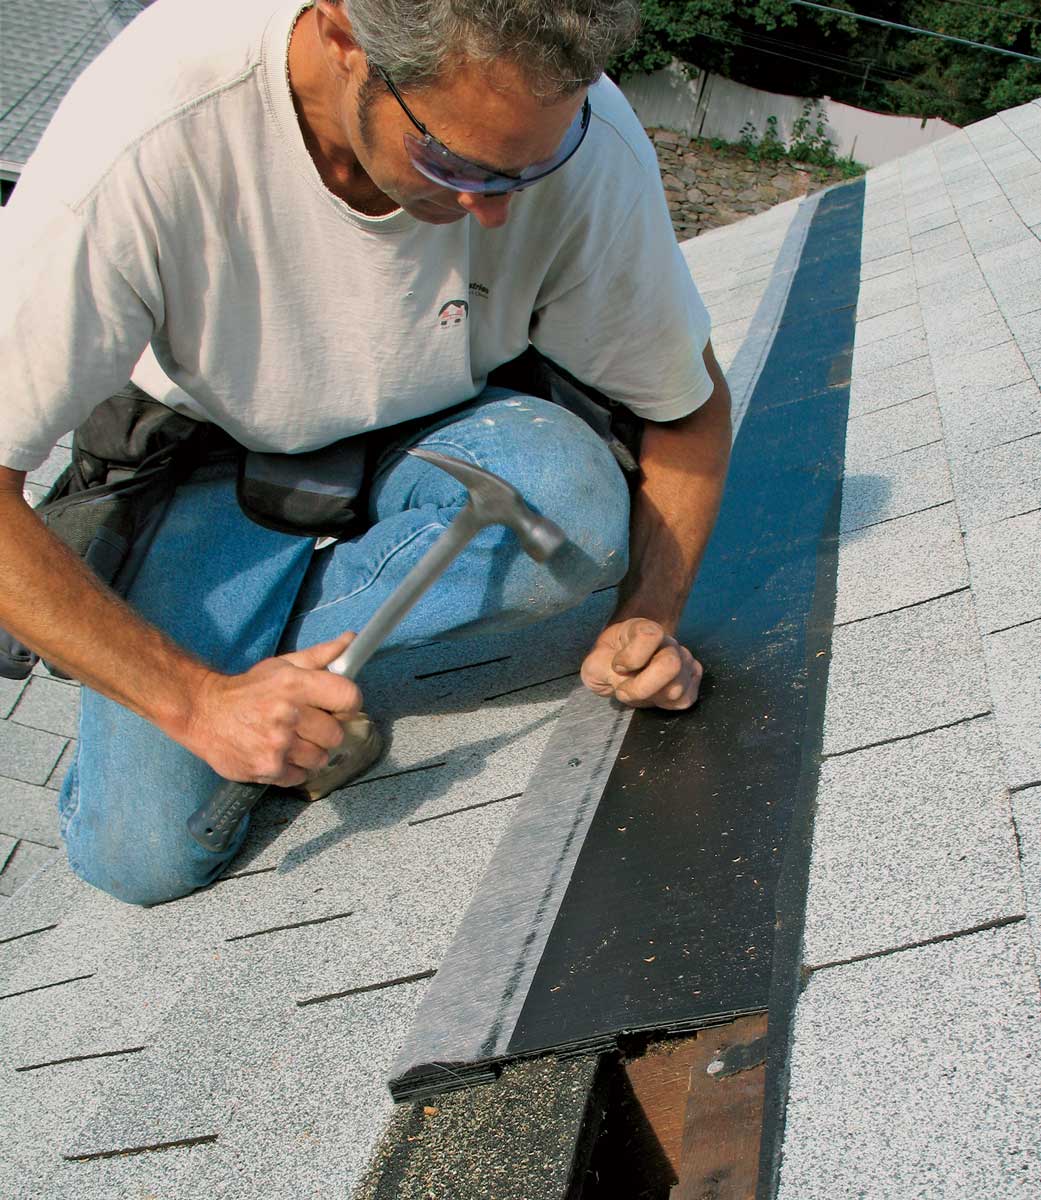 Position the intake vent. Slip the top edge of the vent under the roofing underlayment. Fasten the vent with nails provided by the manufacturer, or use 2-in. to 21⁄2-in. roofing nails.